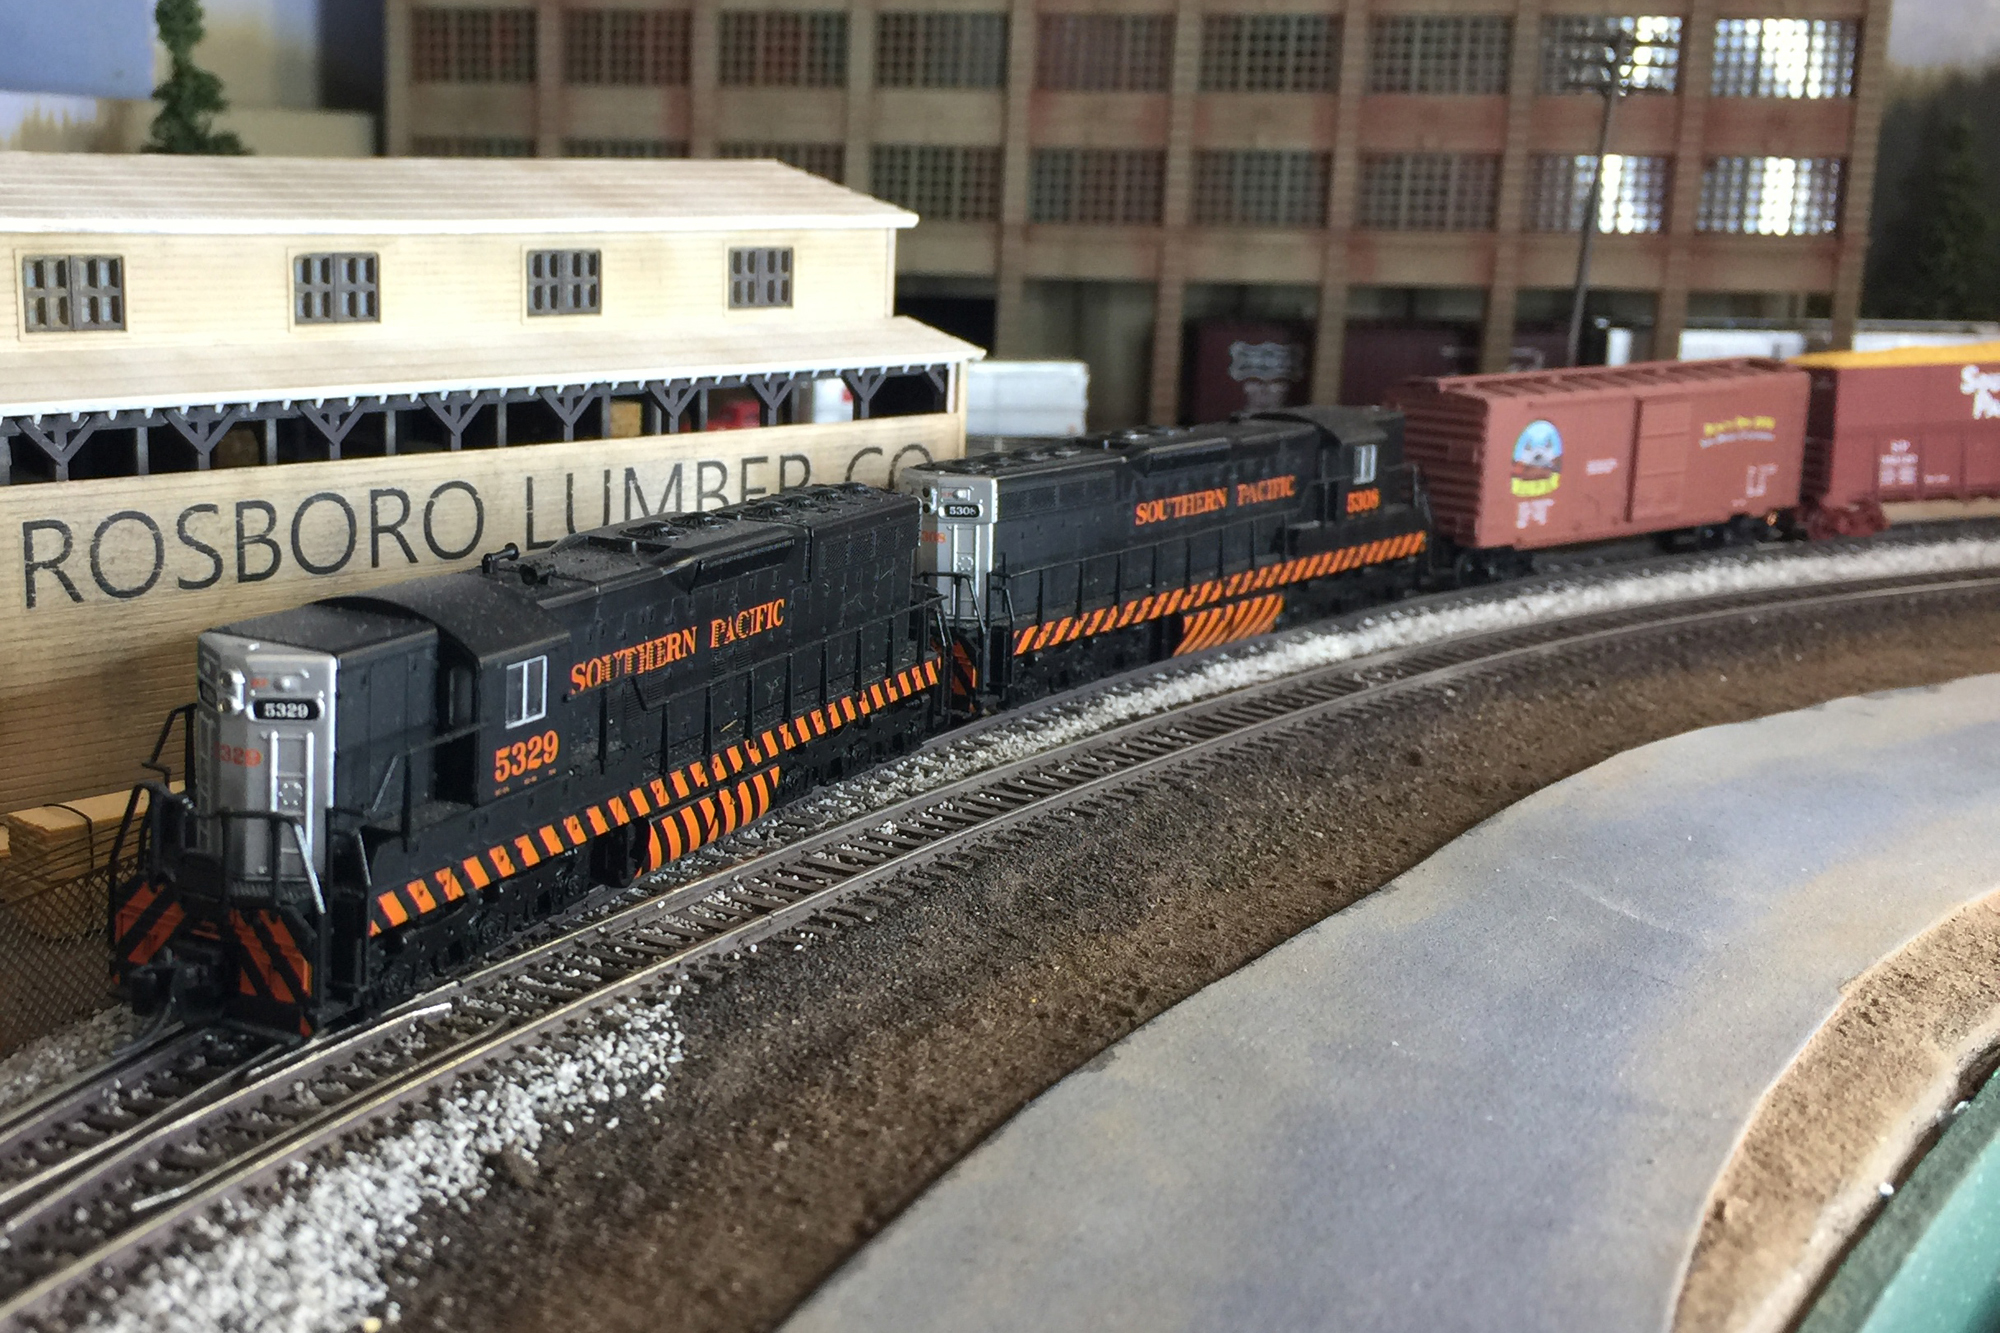 N Scale freight train and layout by Ryan Ryan Di Fede, San Diego Division member.